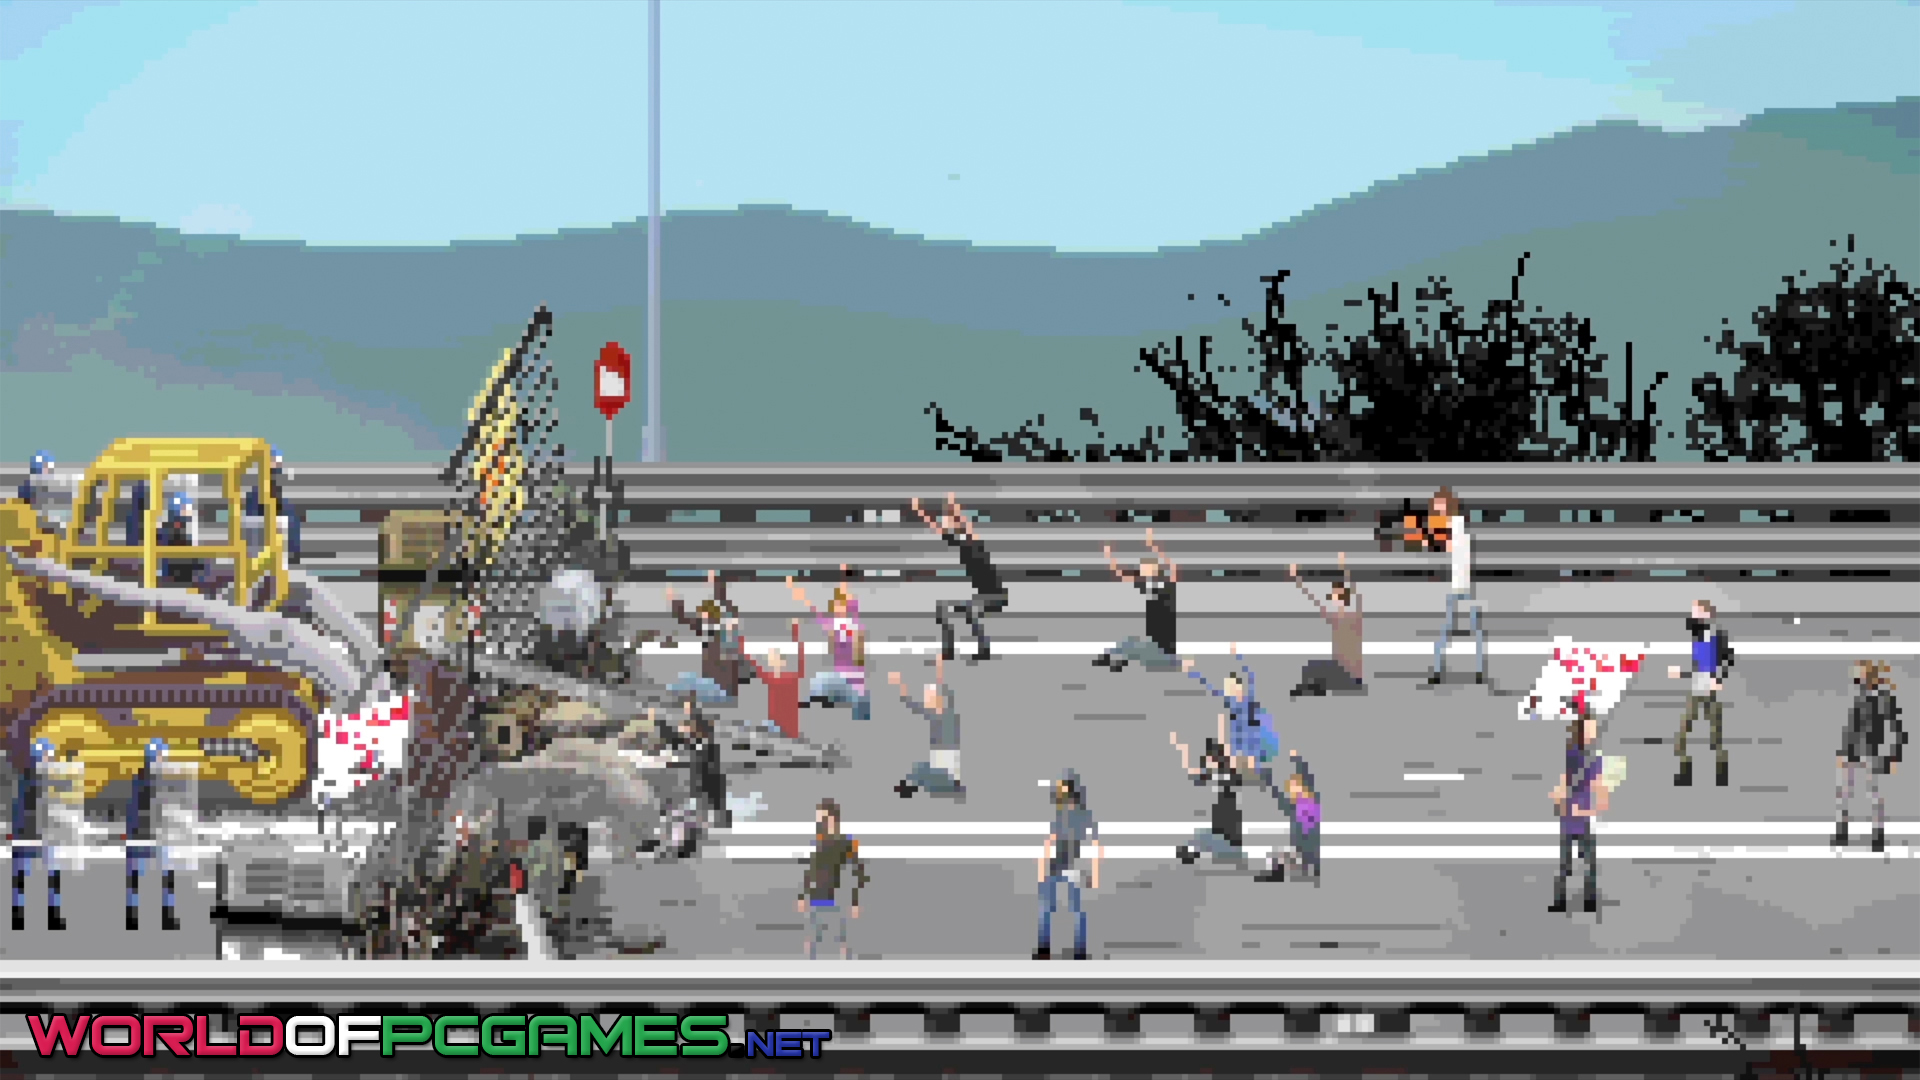 Riot Civil Unrest Free Download PC Game By worldof-pcgames.net